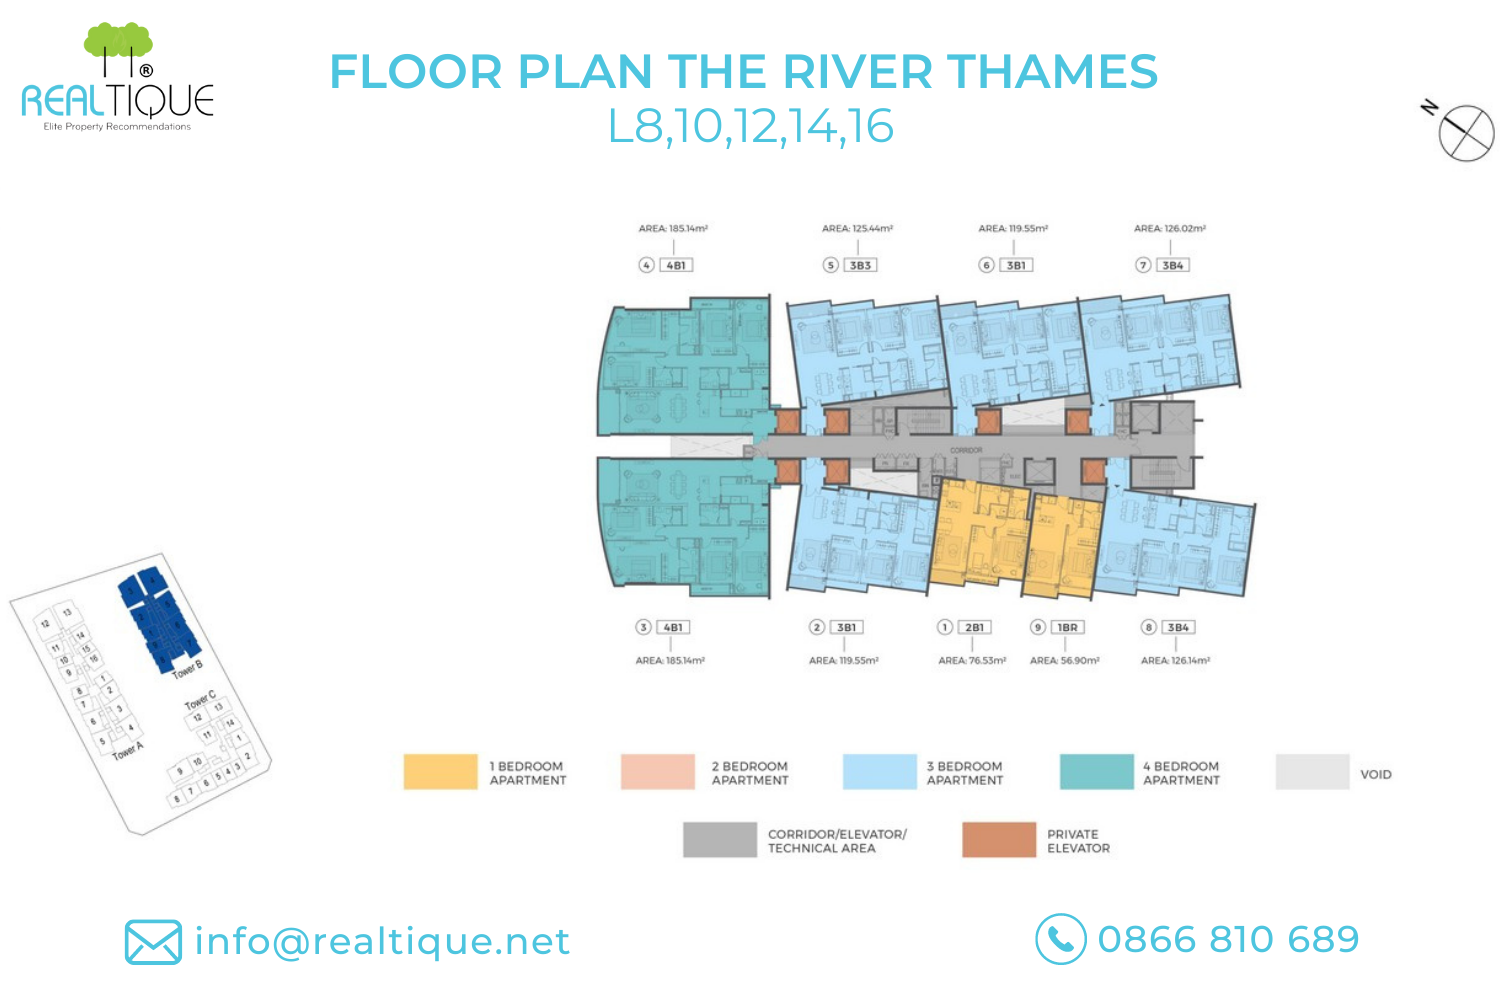 Typical floor plan of Tower River Thames, The River Thu Thiem